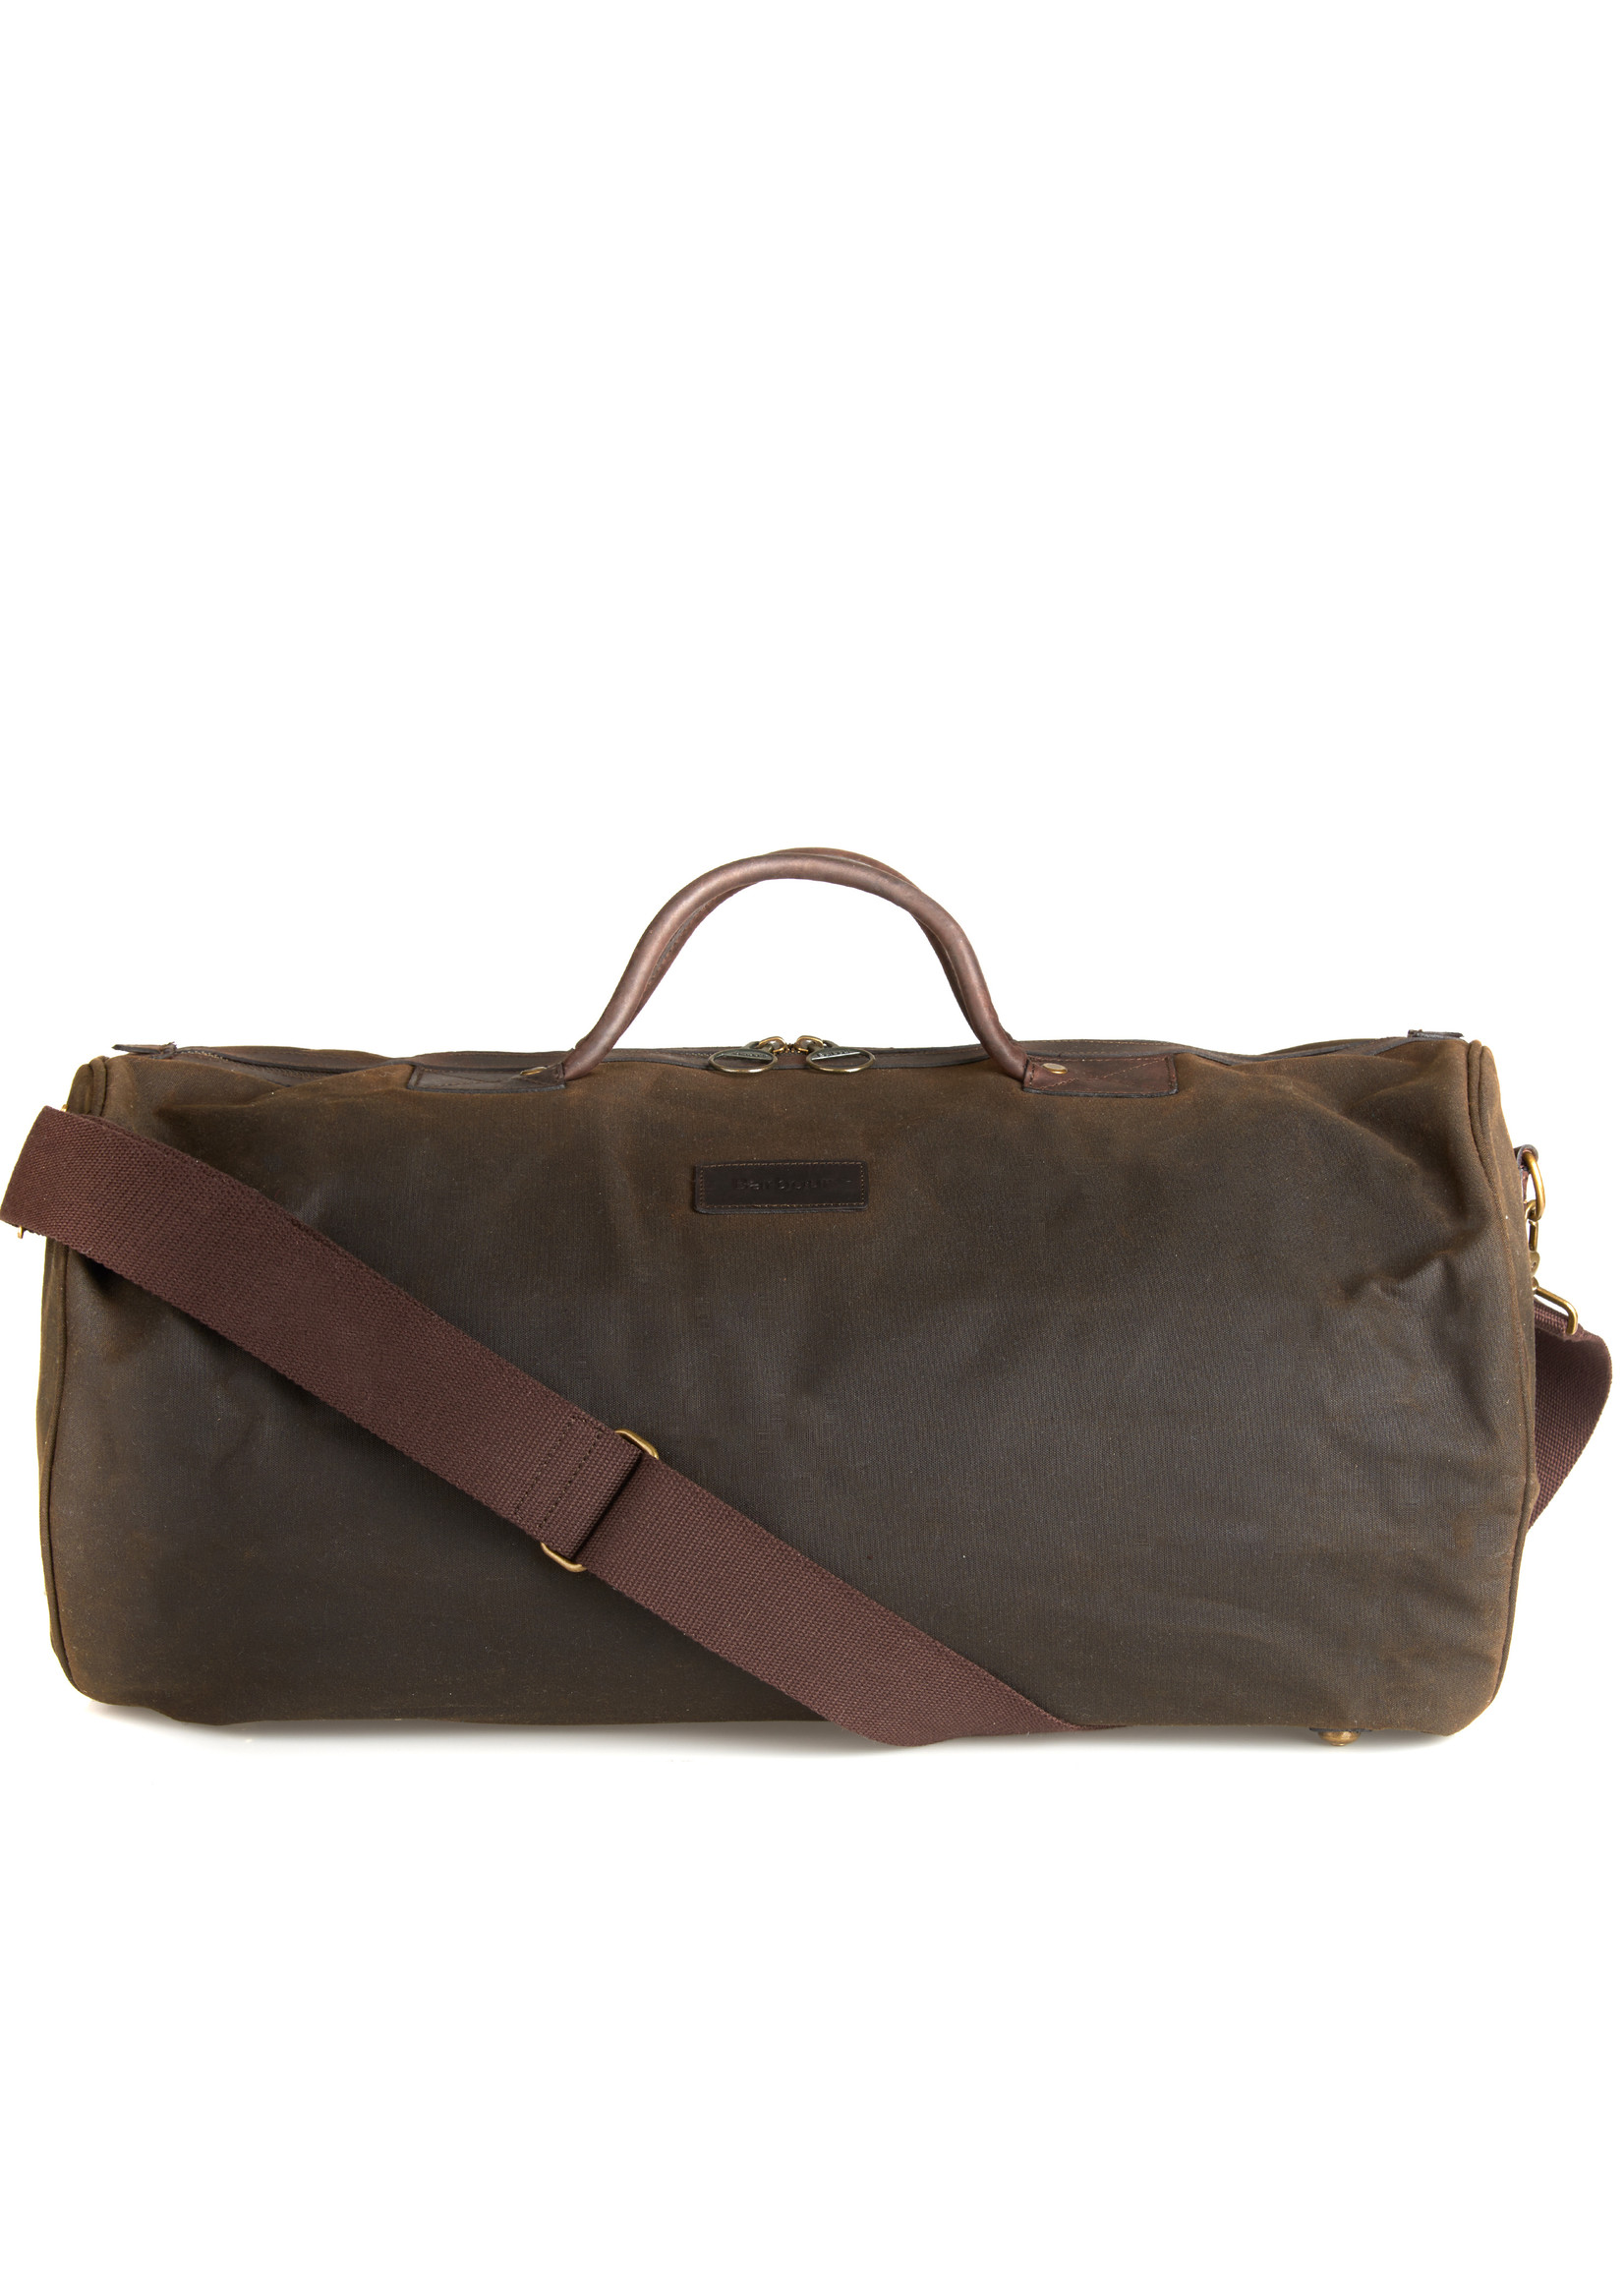 Barbour WAX HOLDALL DUFFEL